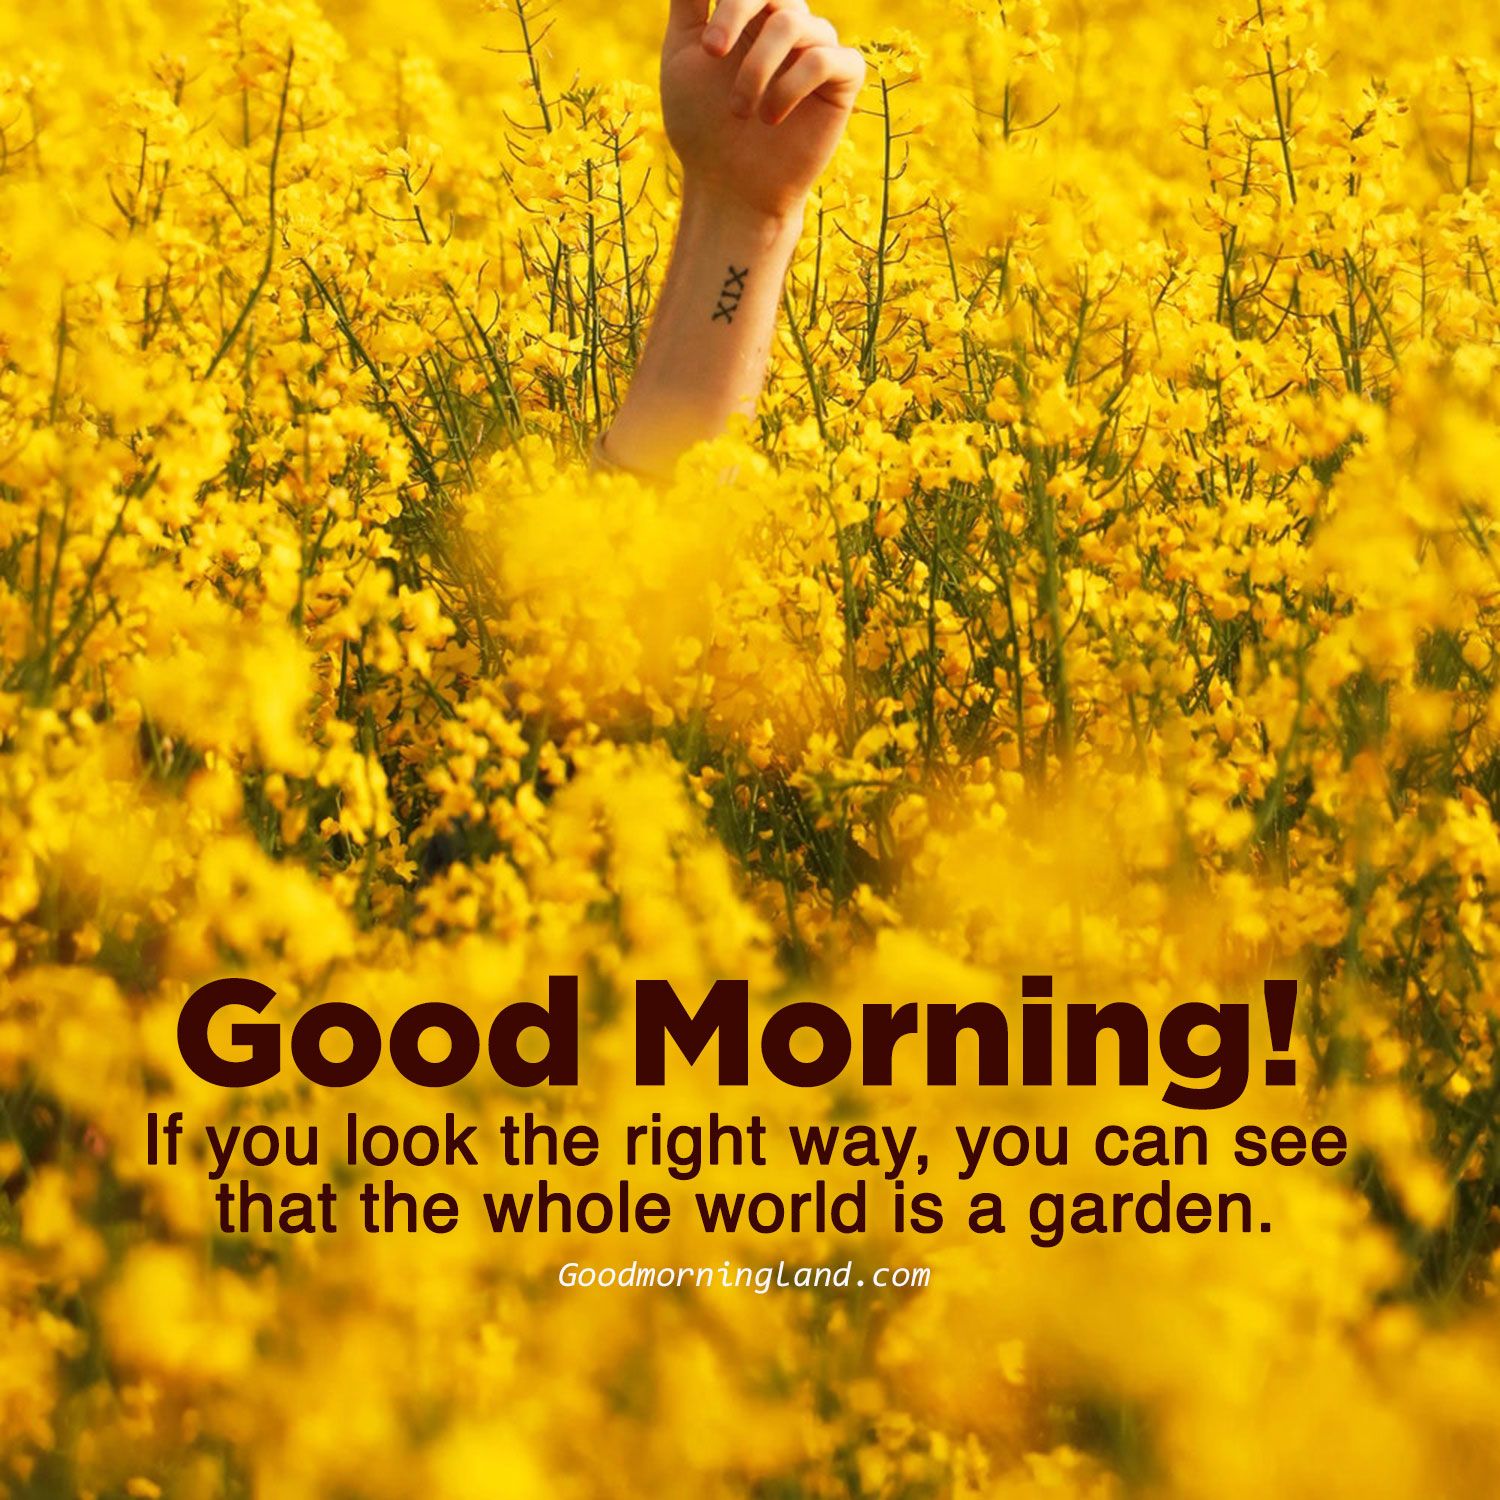 Good morning yellow flower image Morning Image, Quotes, Wishes, Messages, greetings & eCards